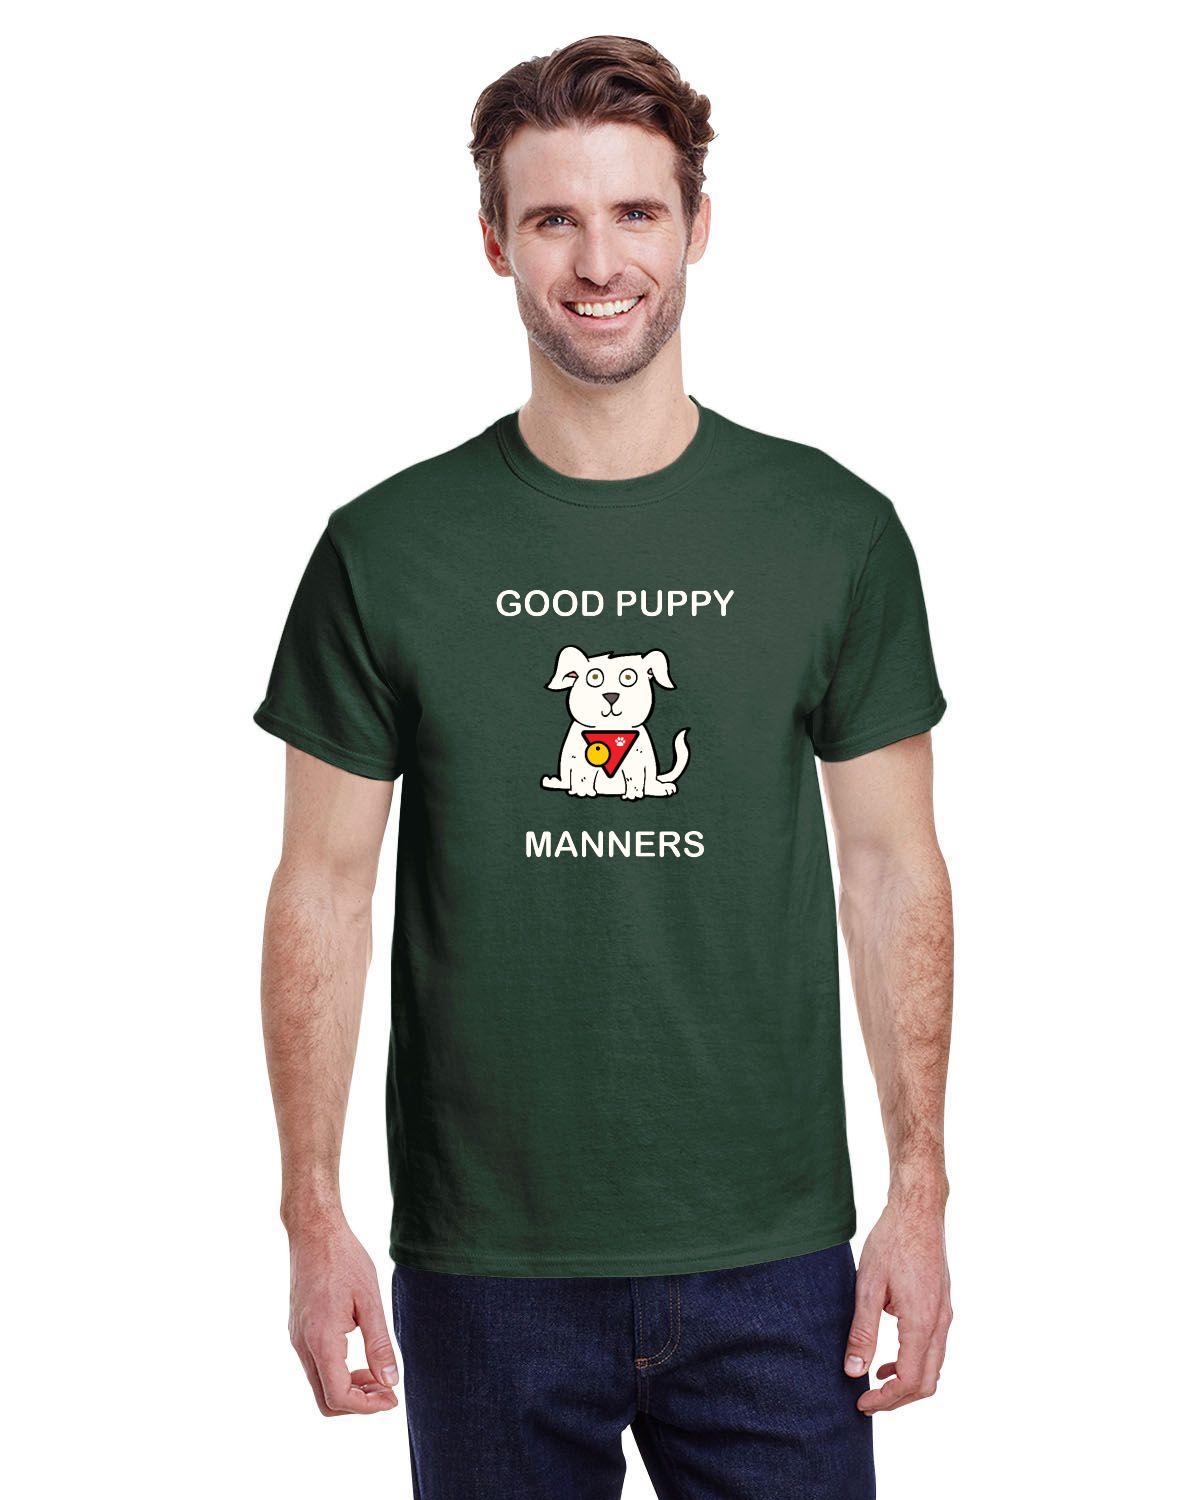 Good Puppy Manners Mens Short Sleeved Tee